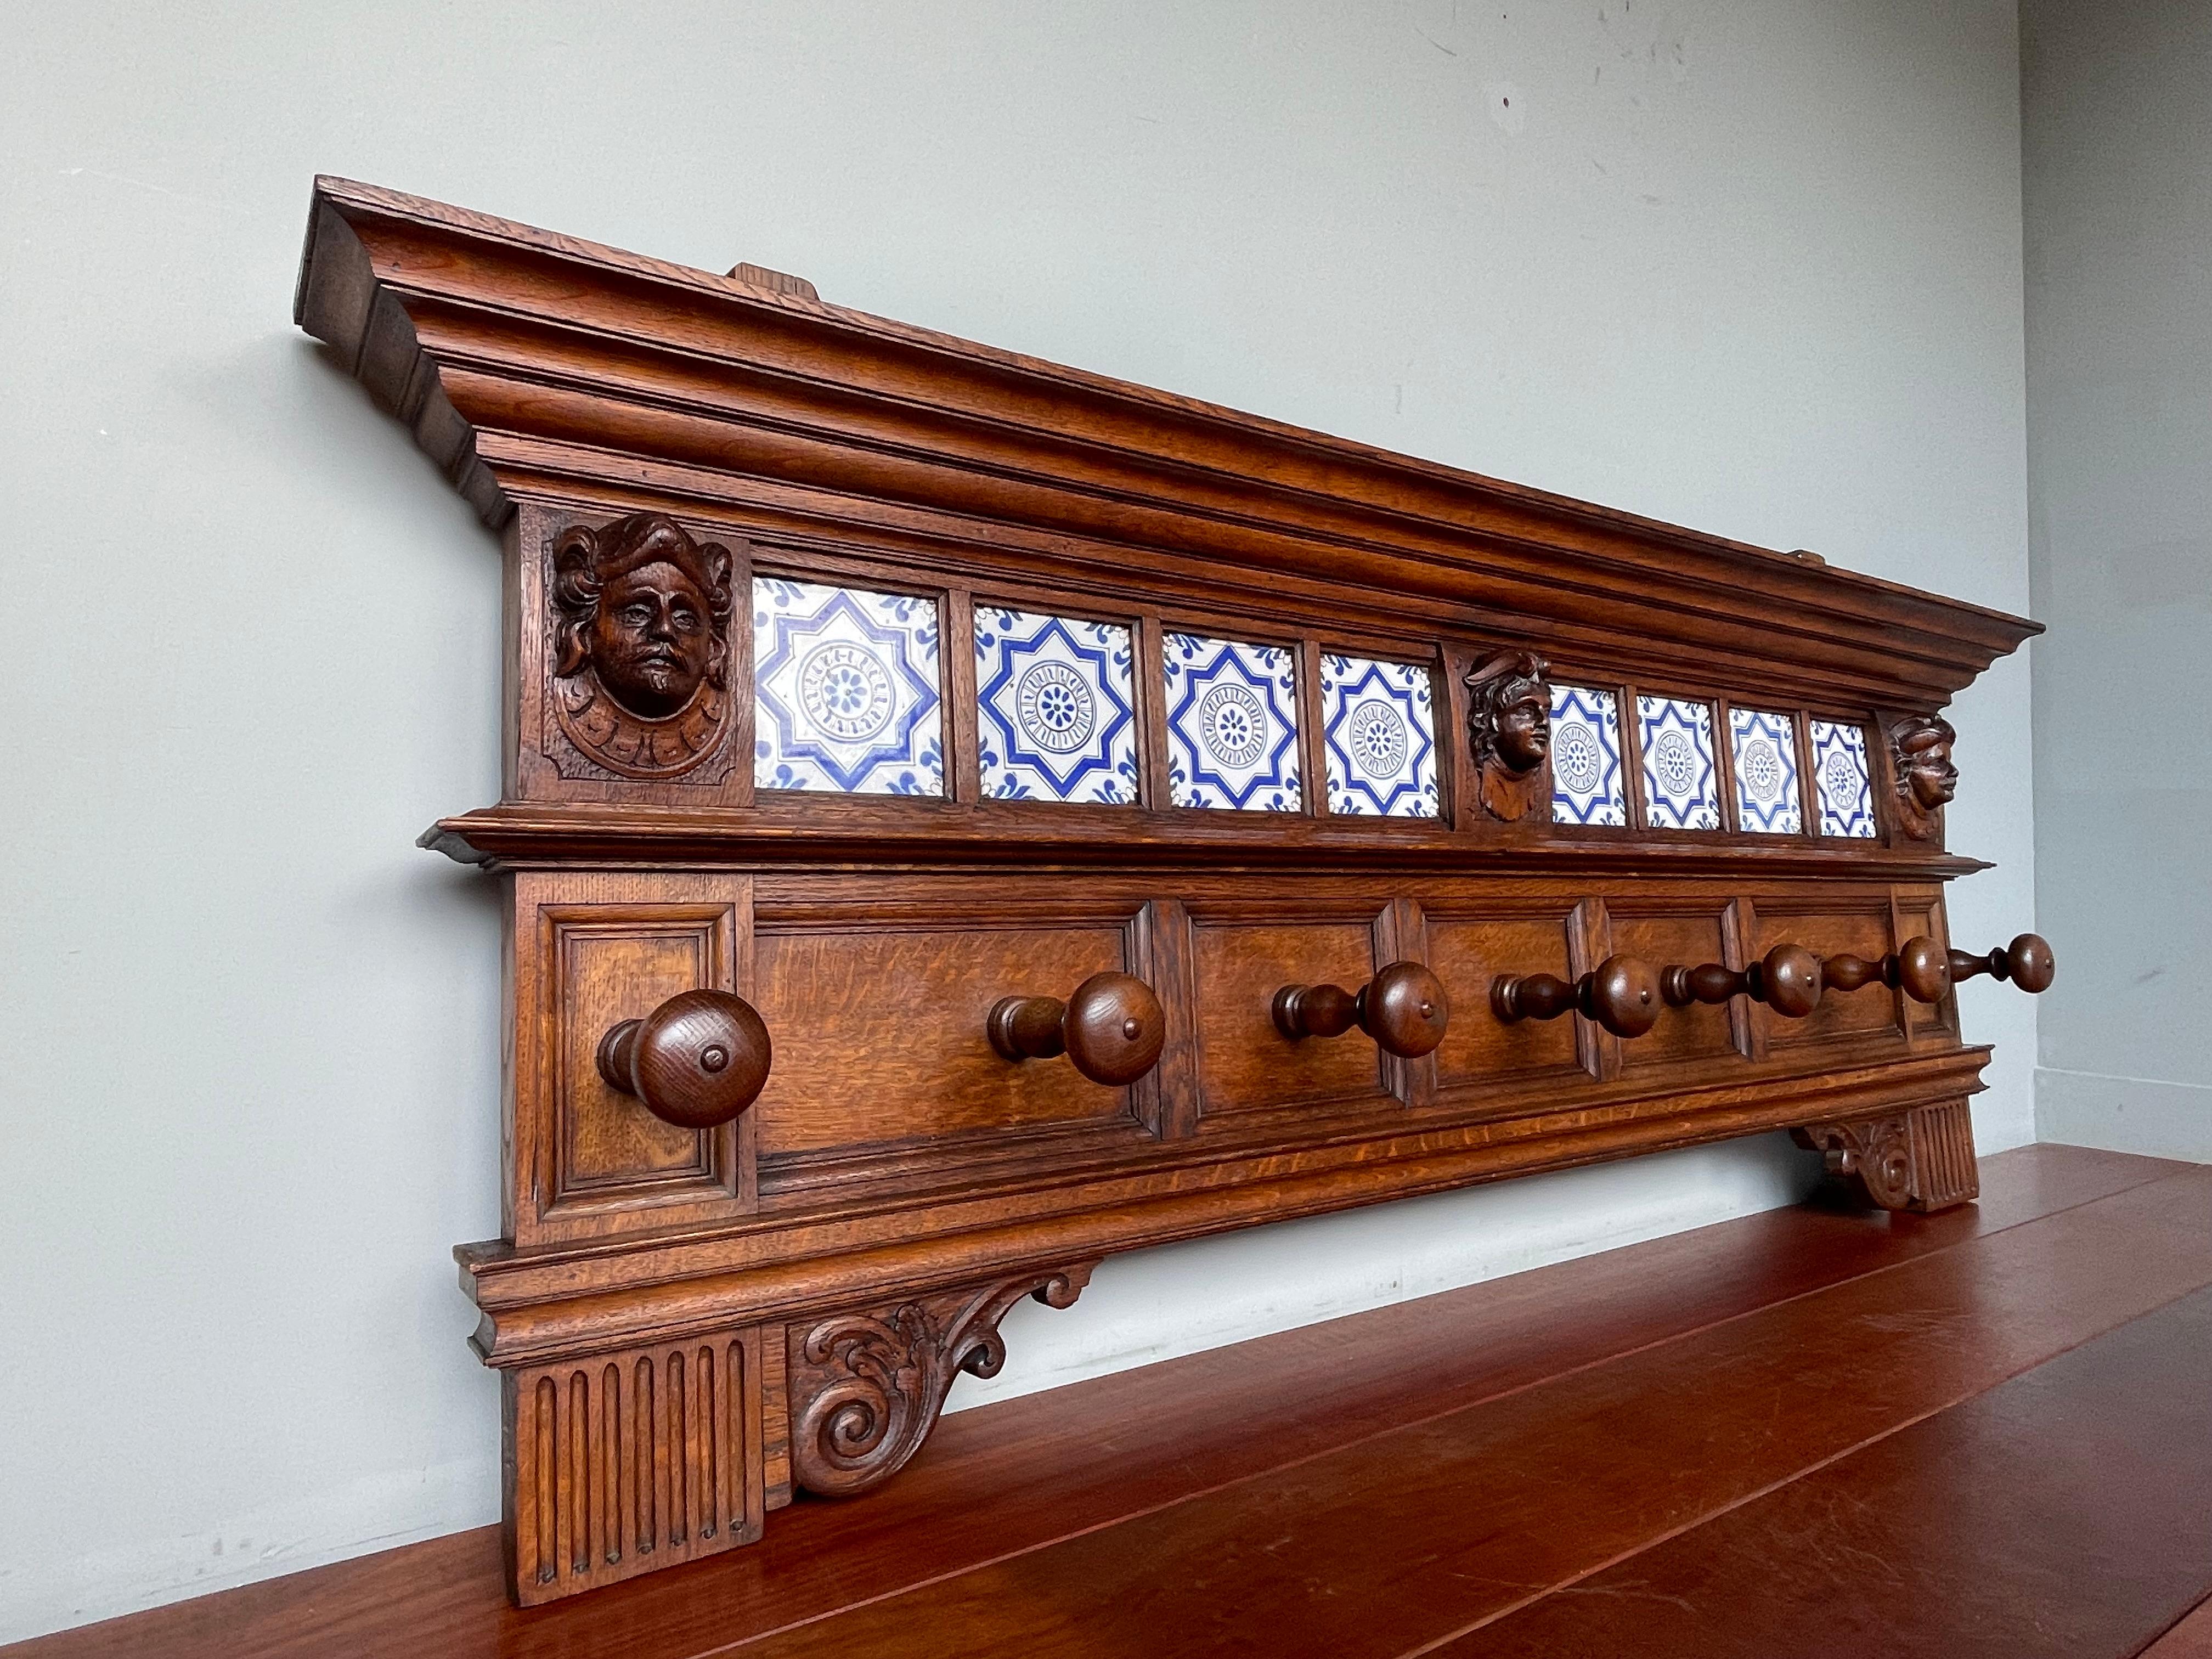 One of the largest ever, impressive and meaningful wall coat racks. Almost 5.5 feet wide. 

If you are a collector of unique and rare size antiques then this early 1800s, Renaissance Revival, solid tiger oak wall coat rack could be perfect for you.